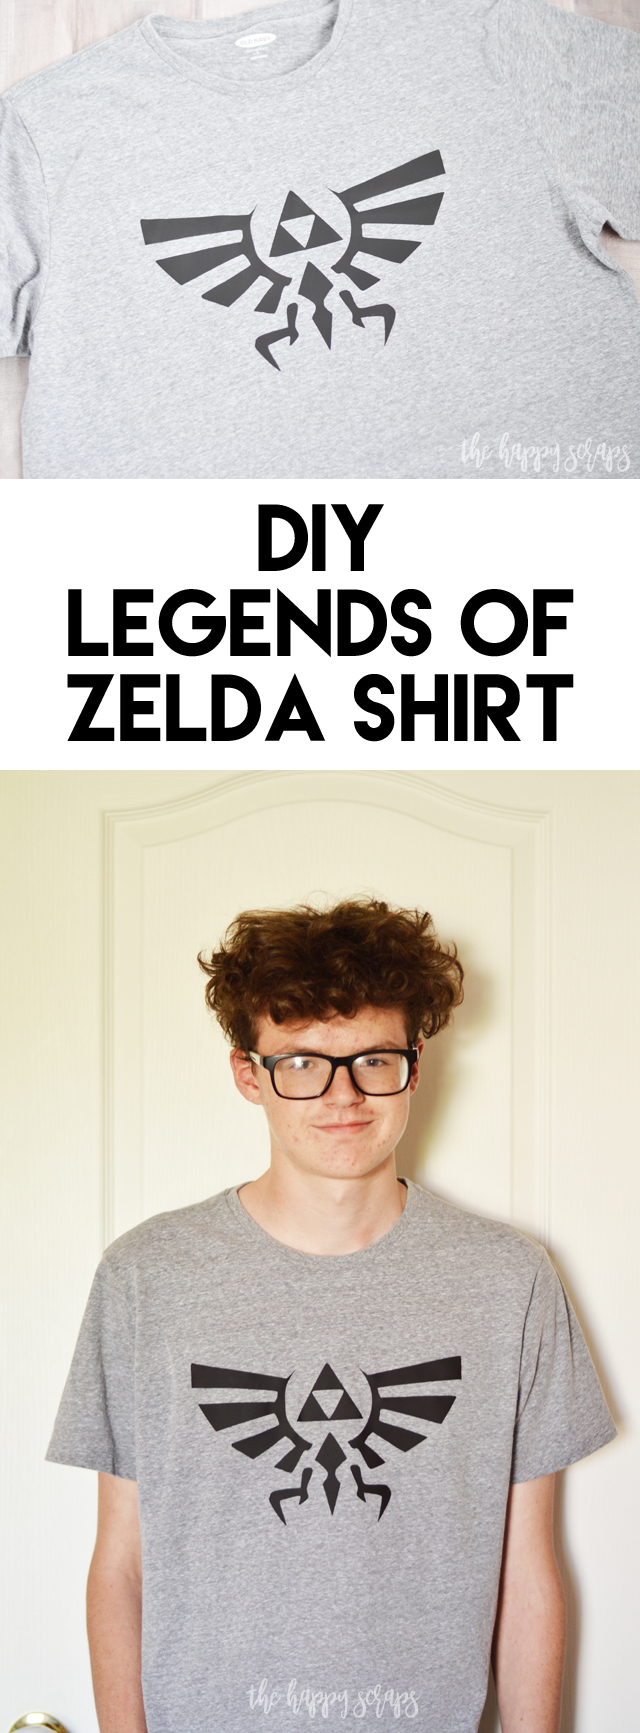 I'm pretty sure I just scored in the mom department when I gave this DIY Legends of Zelda Shirt to my son. He's pretty excited about it!